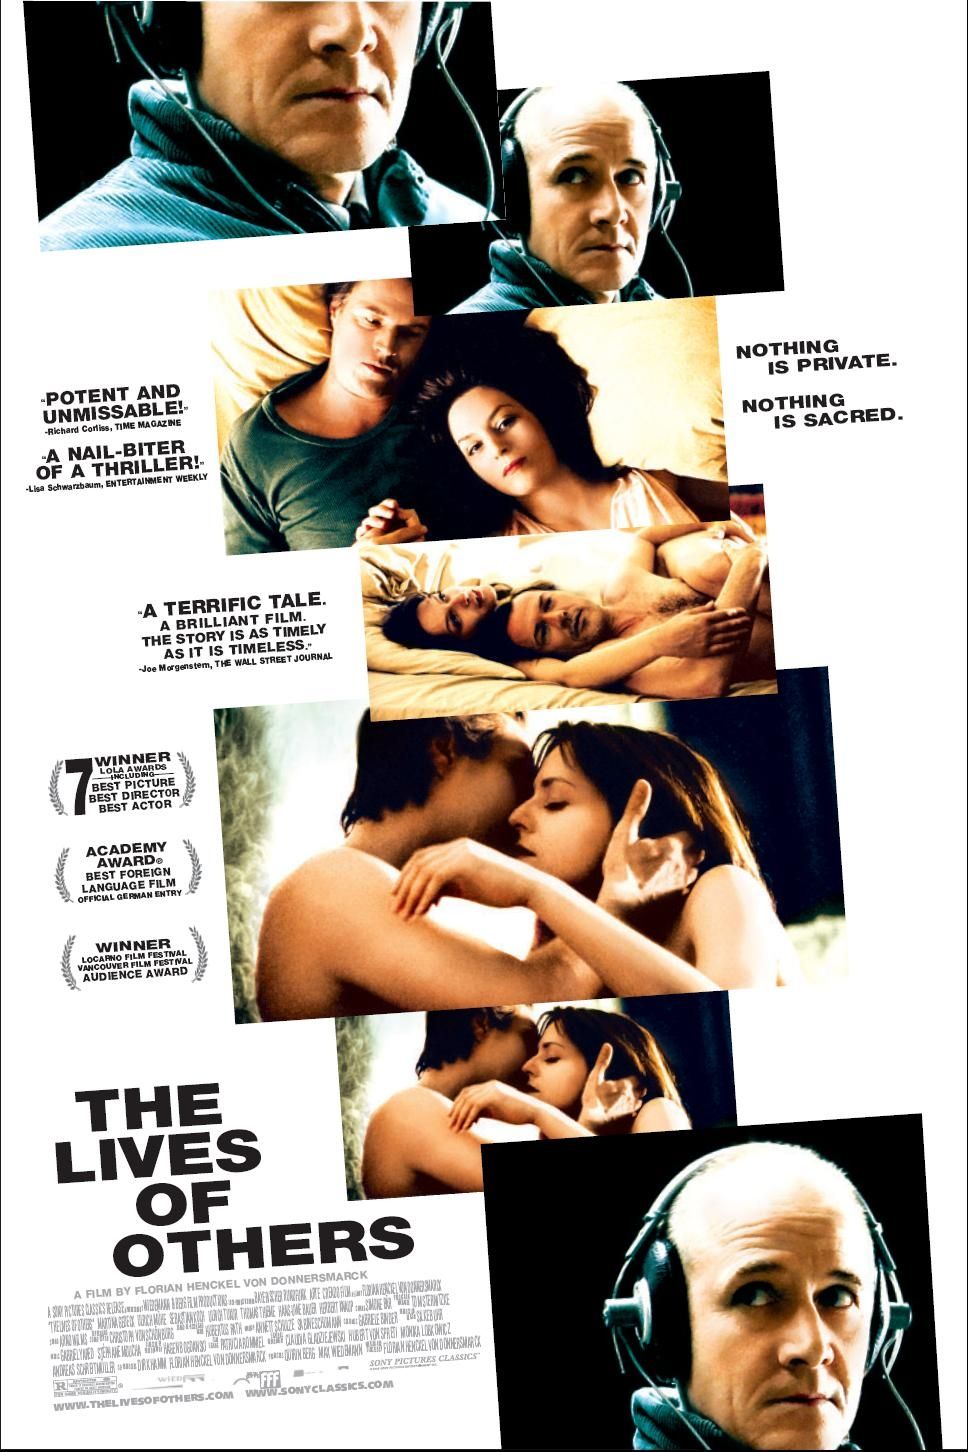 The Lives of Others movie